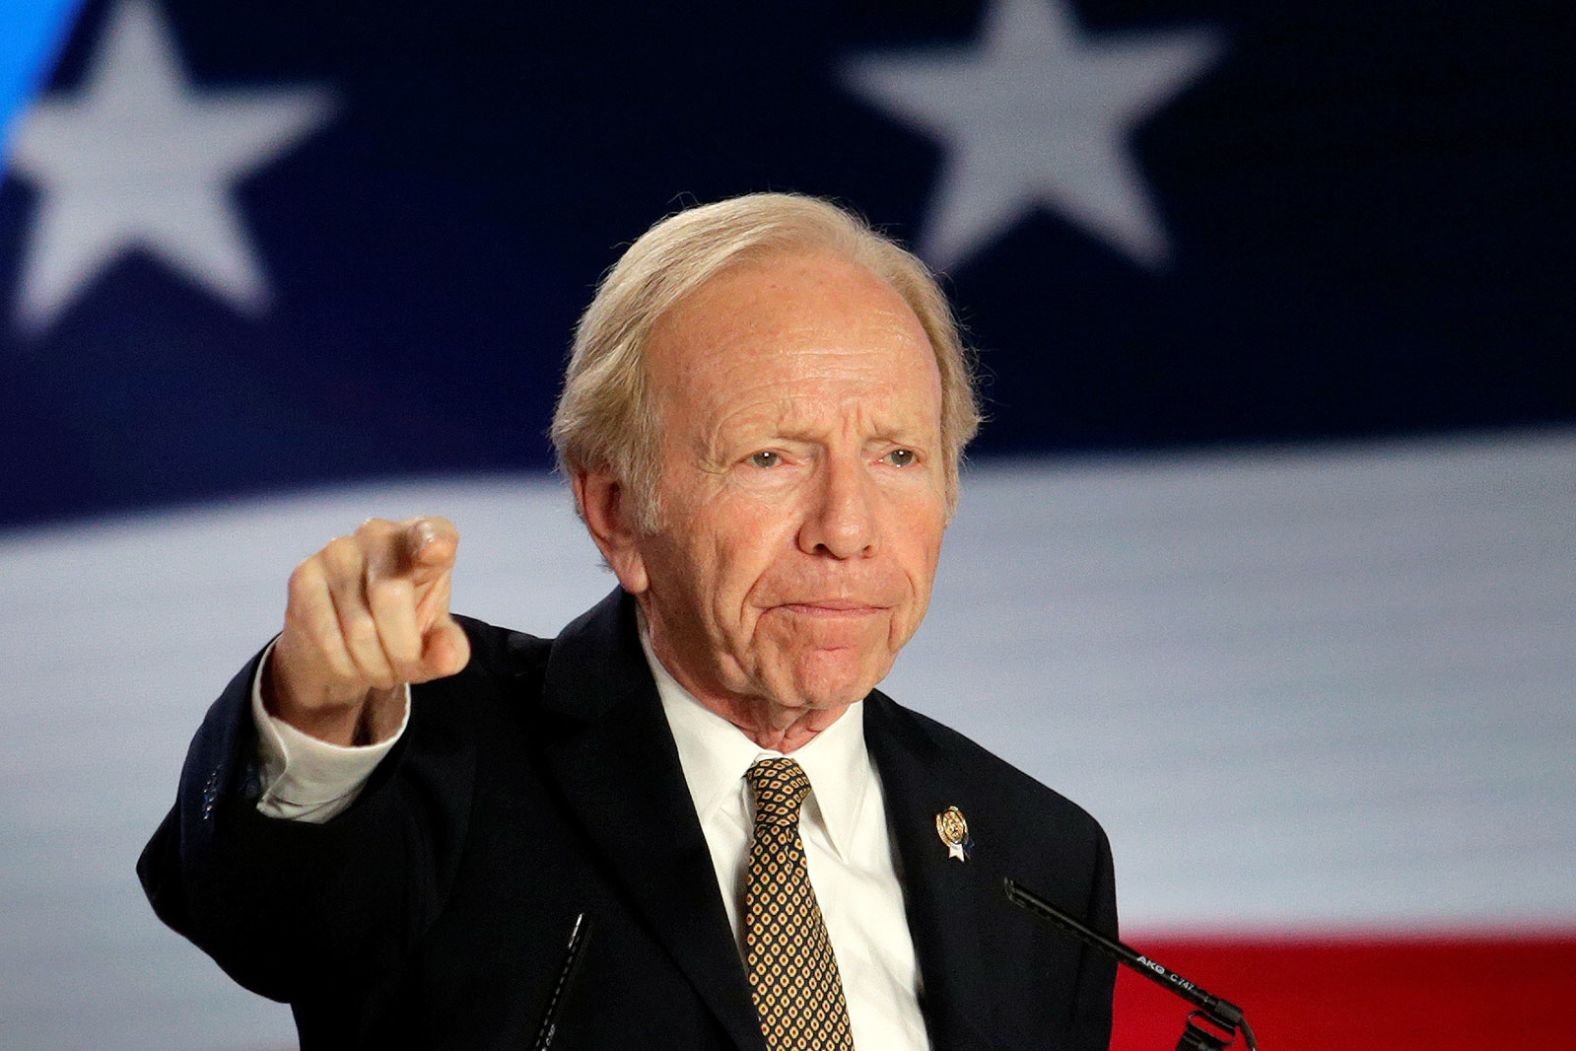 <a href="index.php?page=&url=https%3A%2F%2Fwww.cnn.com%2F2024%2F03%2F27%2Fpolitics%2Fjoe-lieberman%2Findex.html" target="_blank">Joe Lieberman</a>, the first Jewish vice-presidential nominee of a major party, whose conscience and independent streak later led him on a journey away from his home in the Democratic Party, died Wednesday, March 27, according to a statement from his family. He was 82.